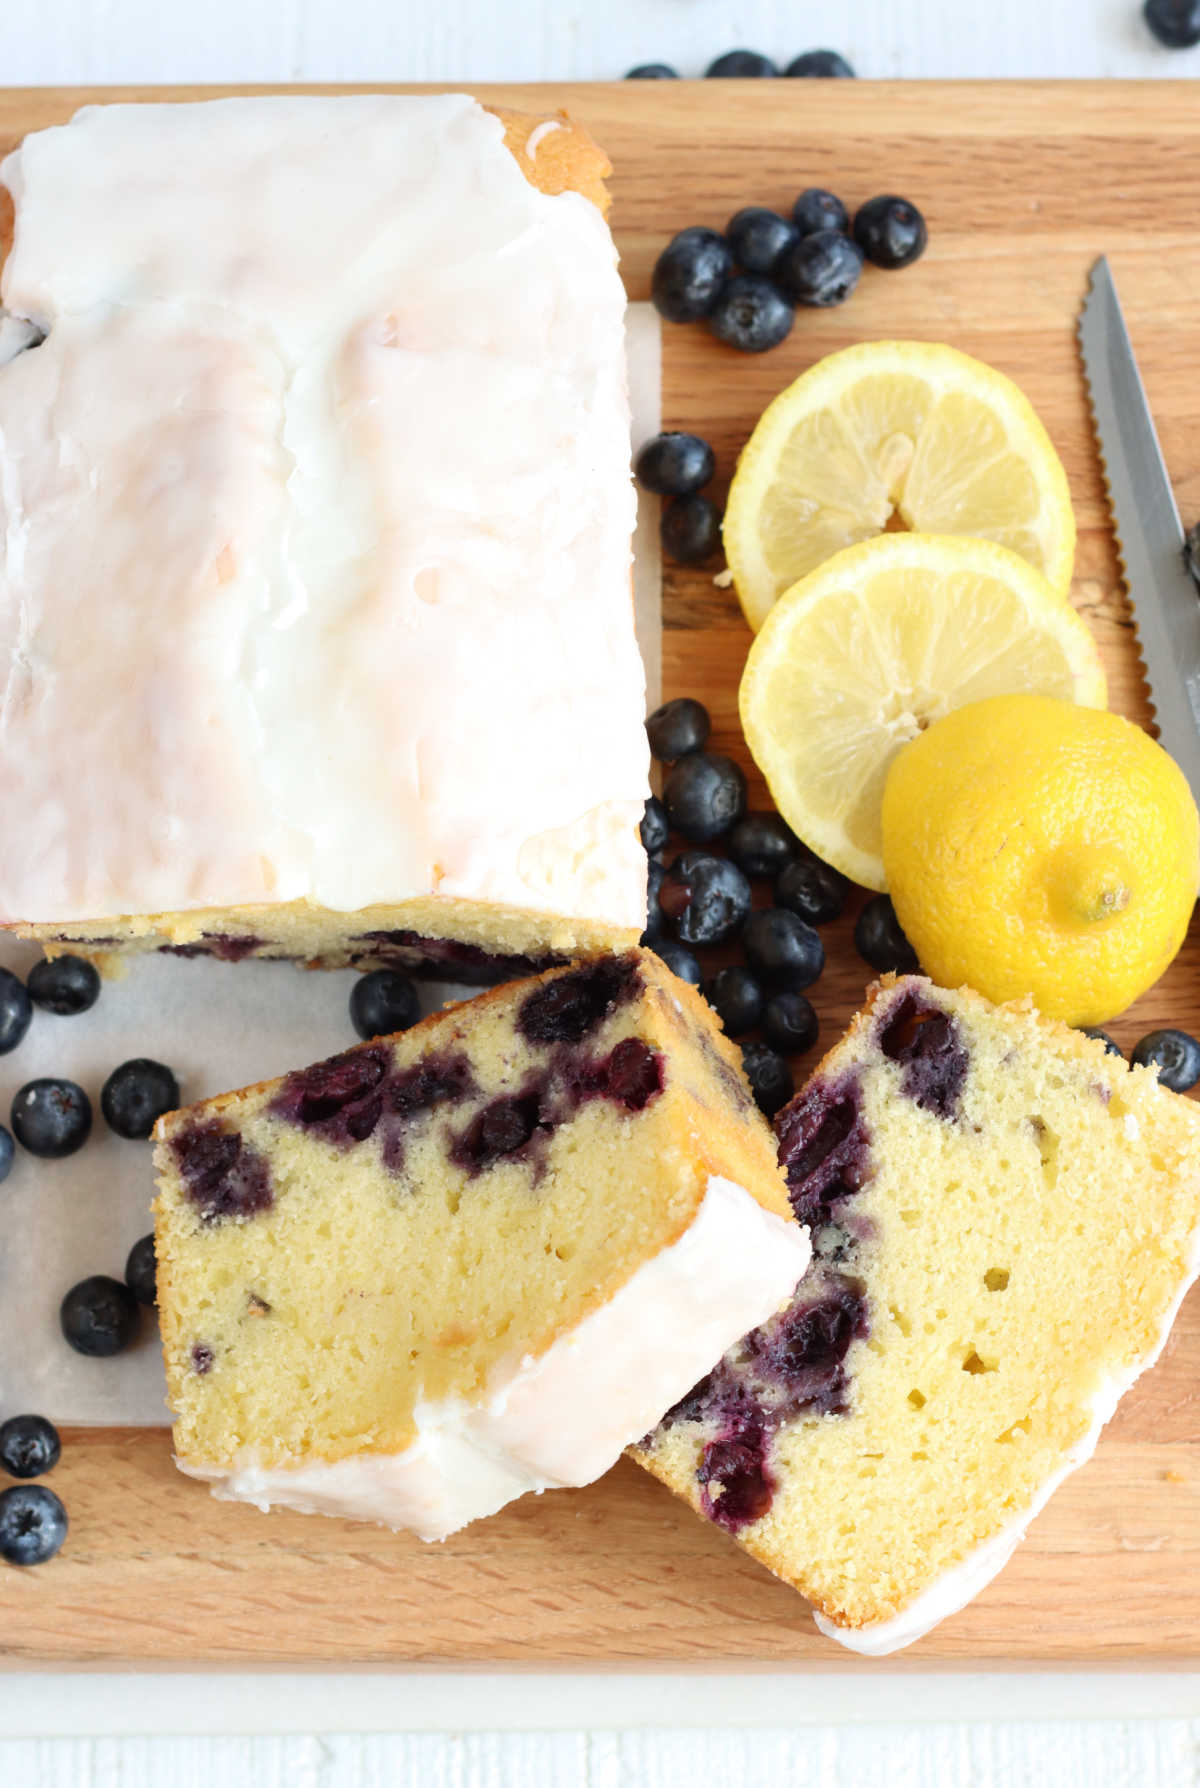 Lemon blueberry loaf cake partially sliced on wooden cutting board.